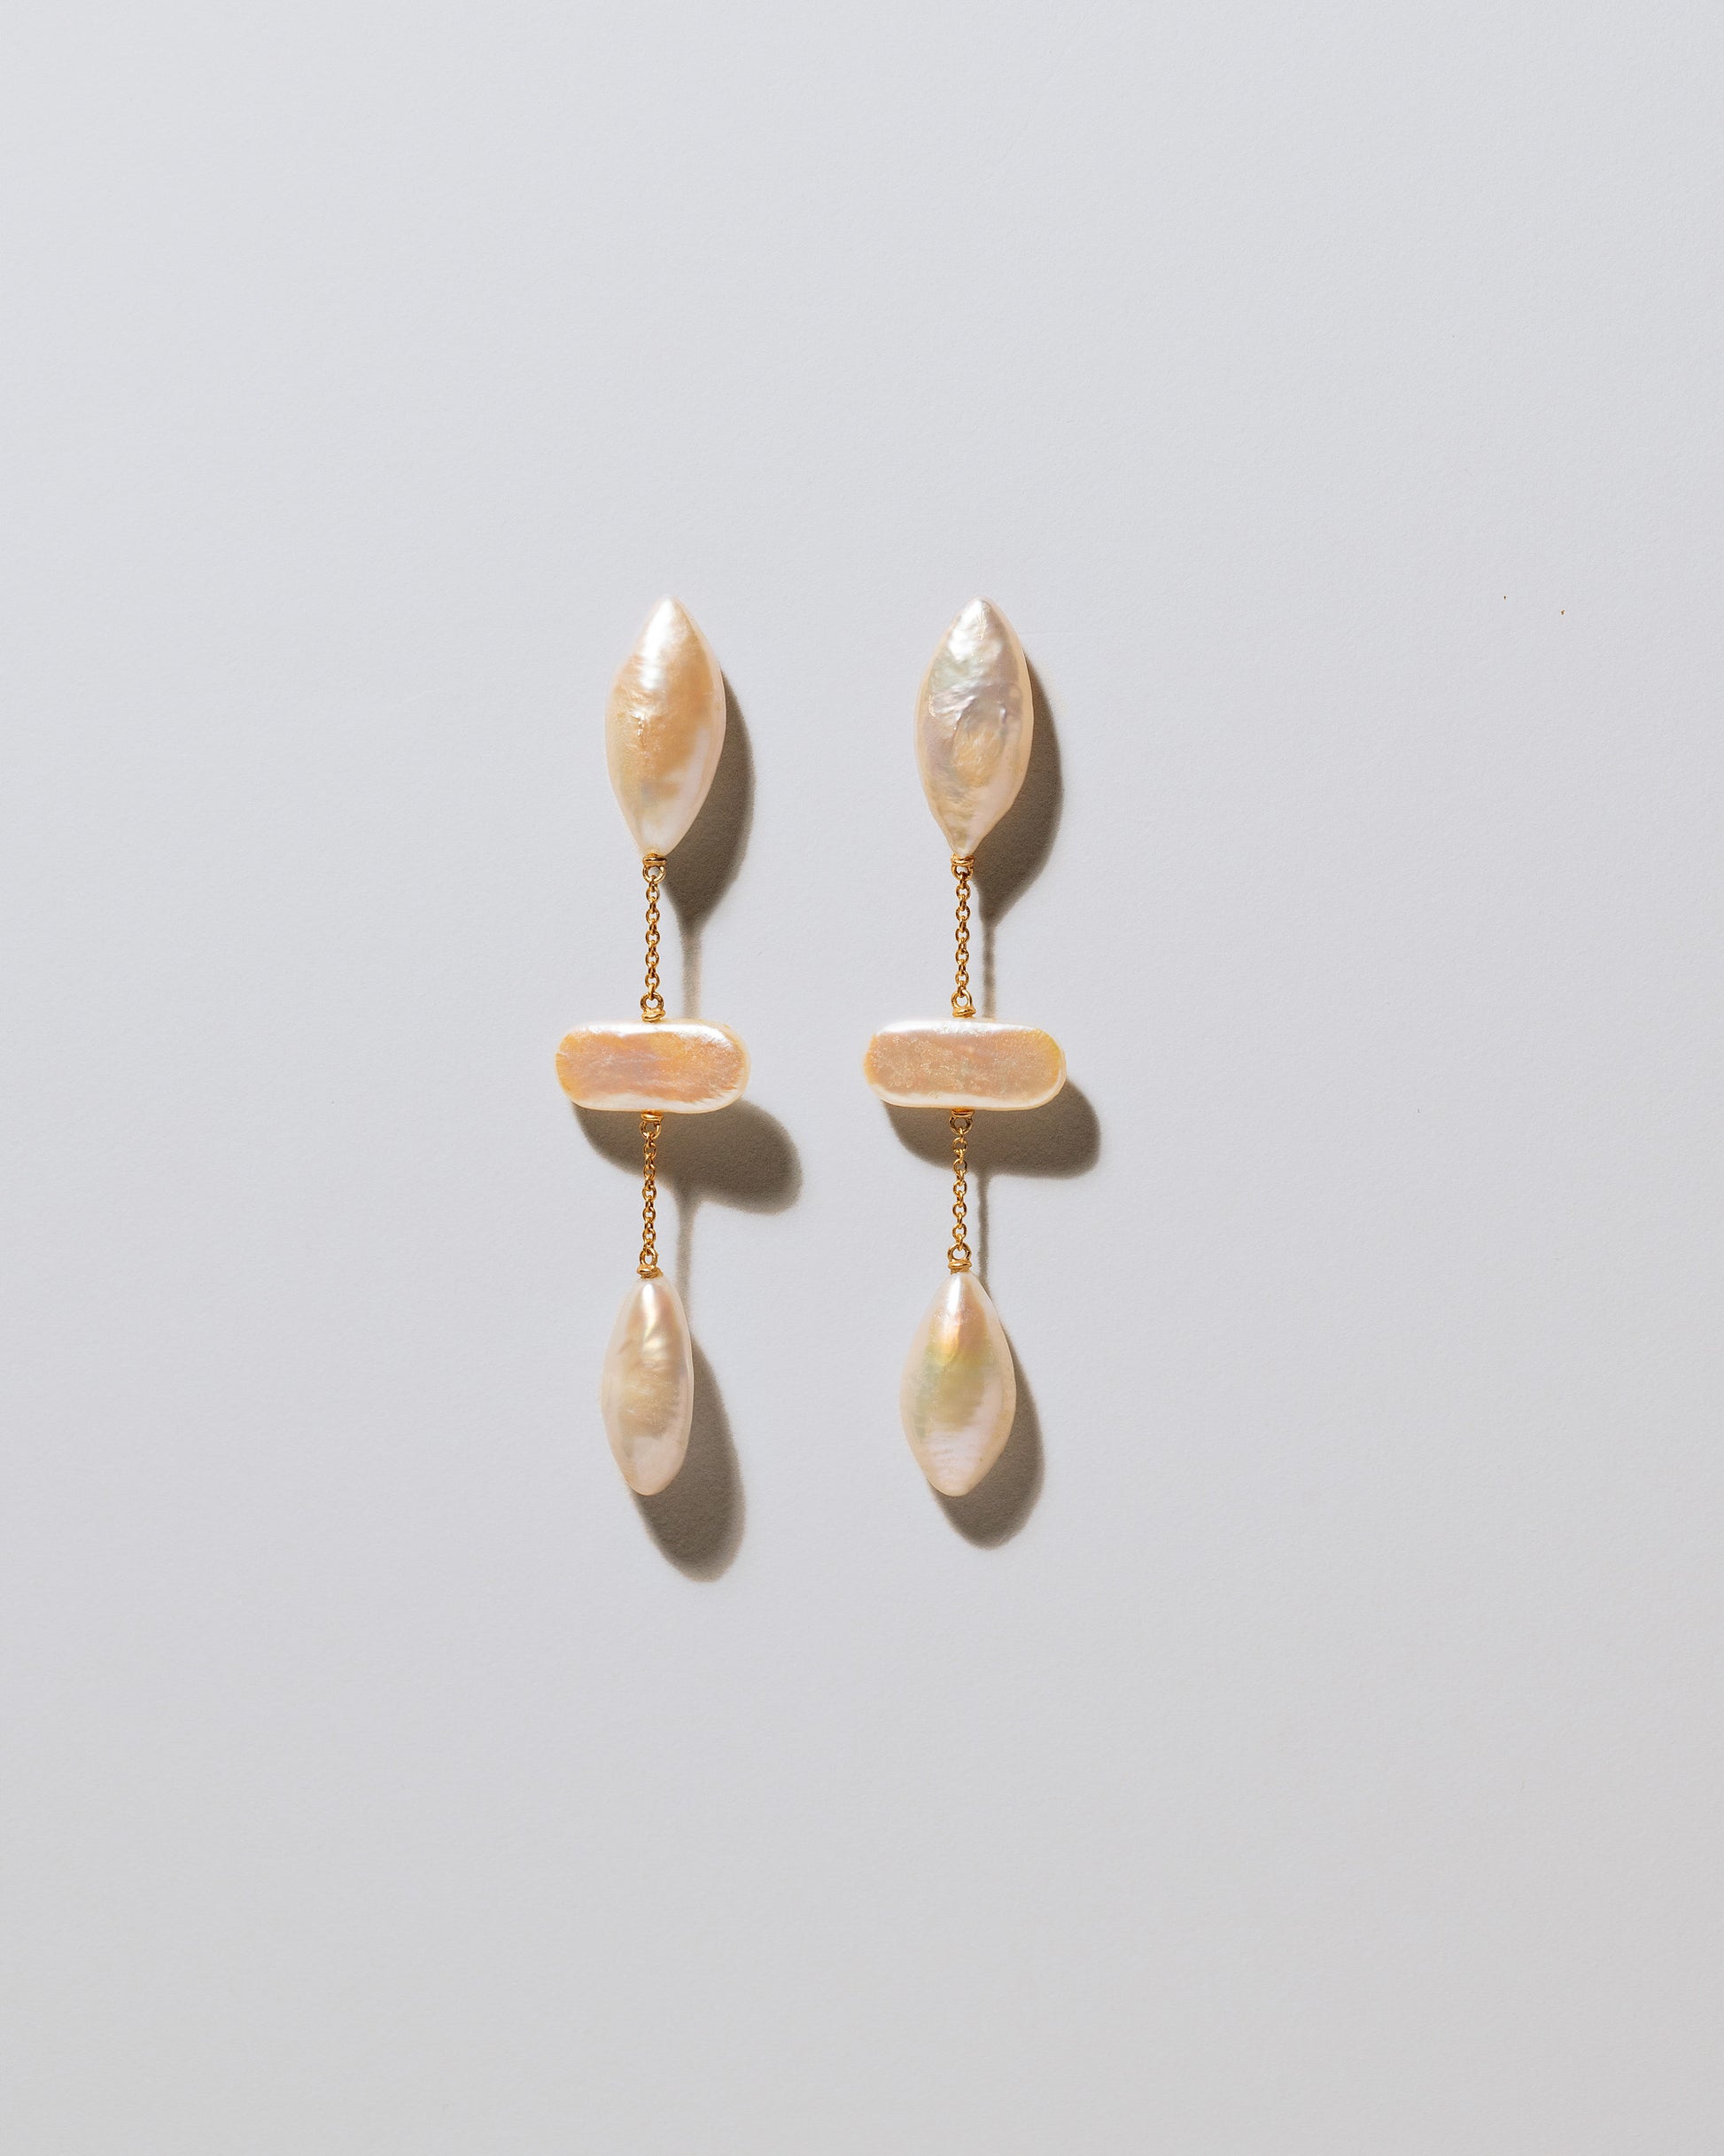 Osprey Pearl Earrings on light color background.